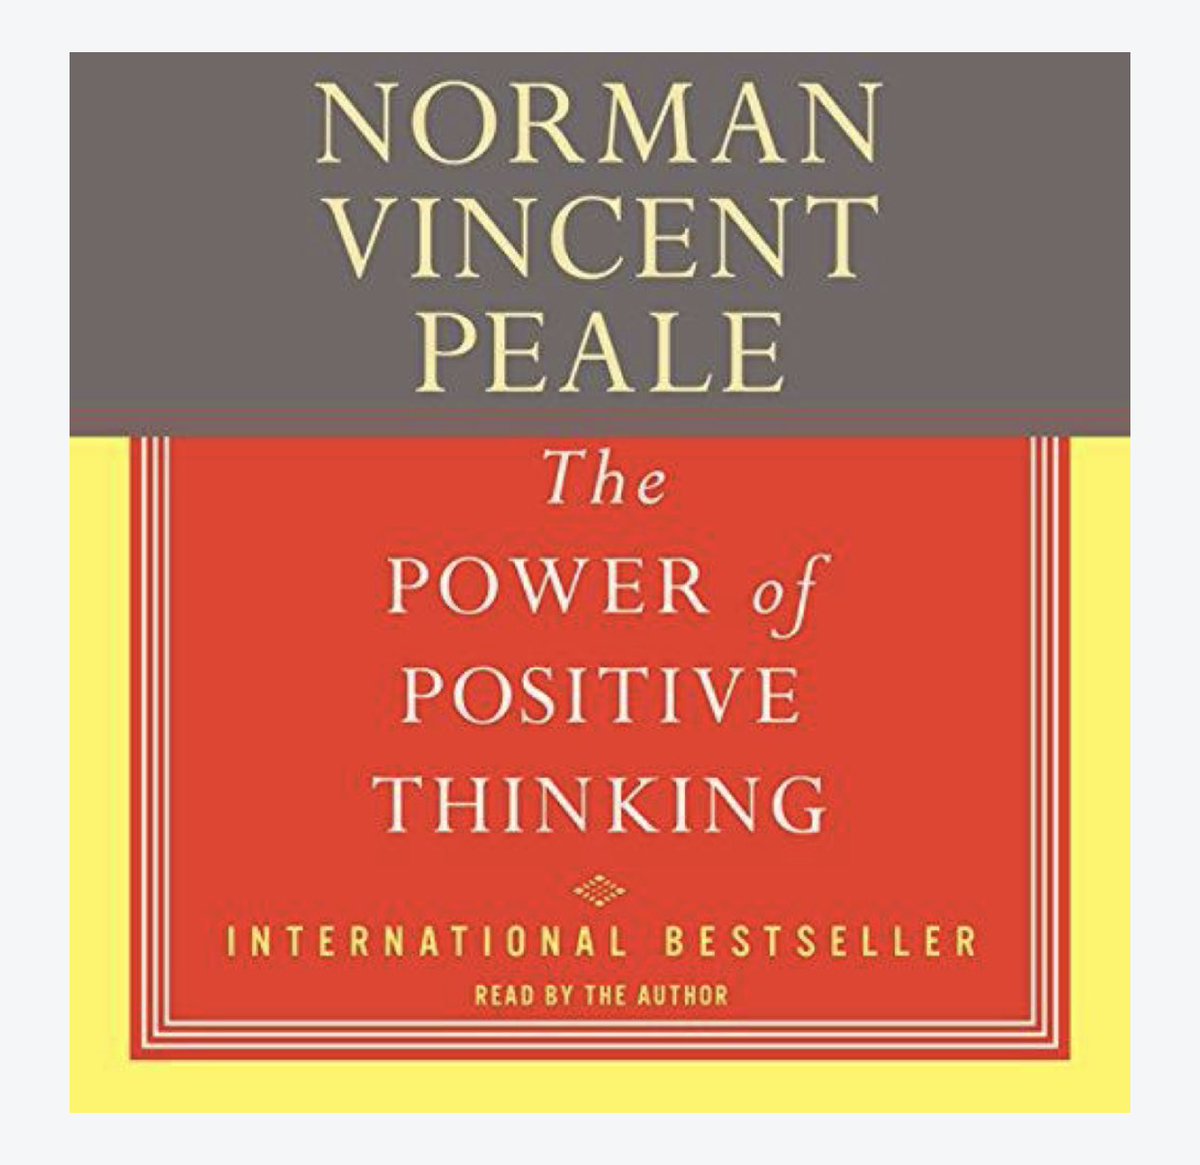 Starting Book number 37 - The Power of Positive Thinking.

Determined to hit my goal of 52 by years end. #PowerOfPositiveThinking #BookClub 🧠📚